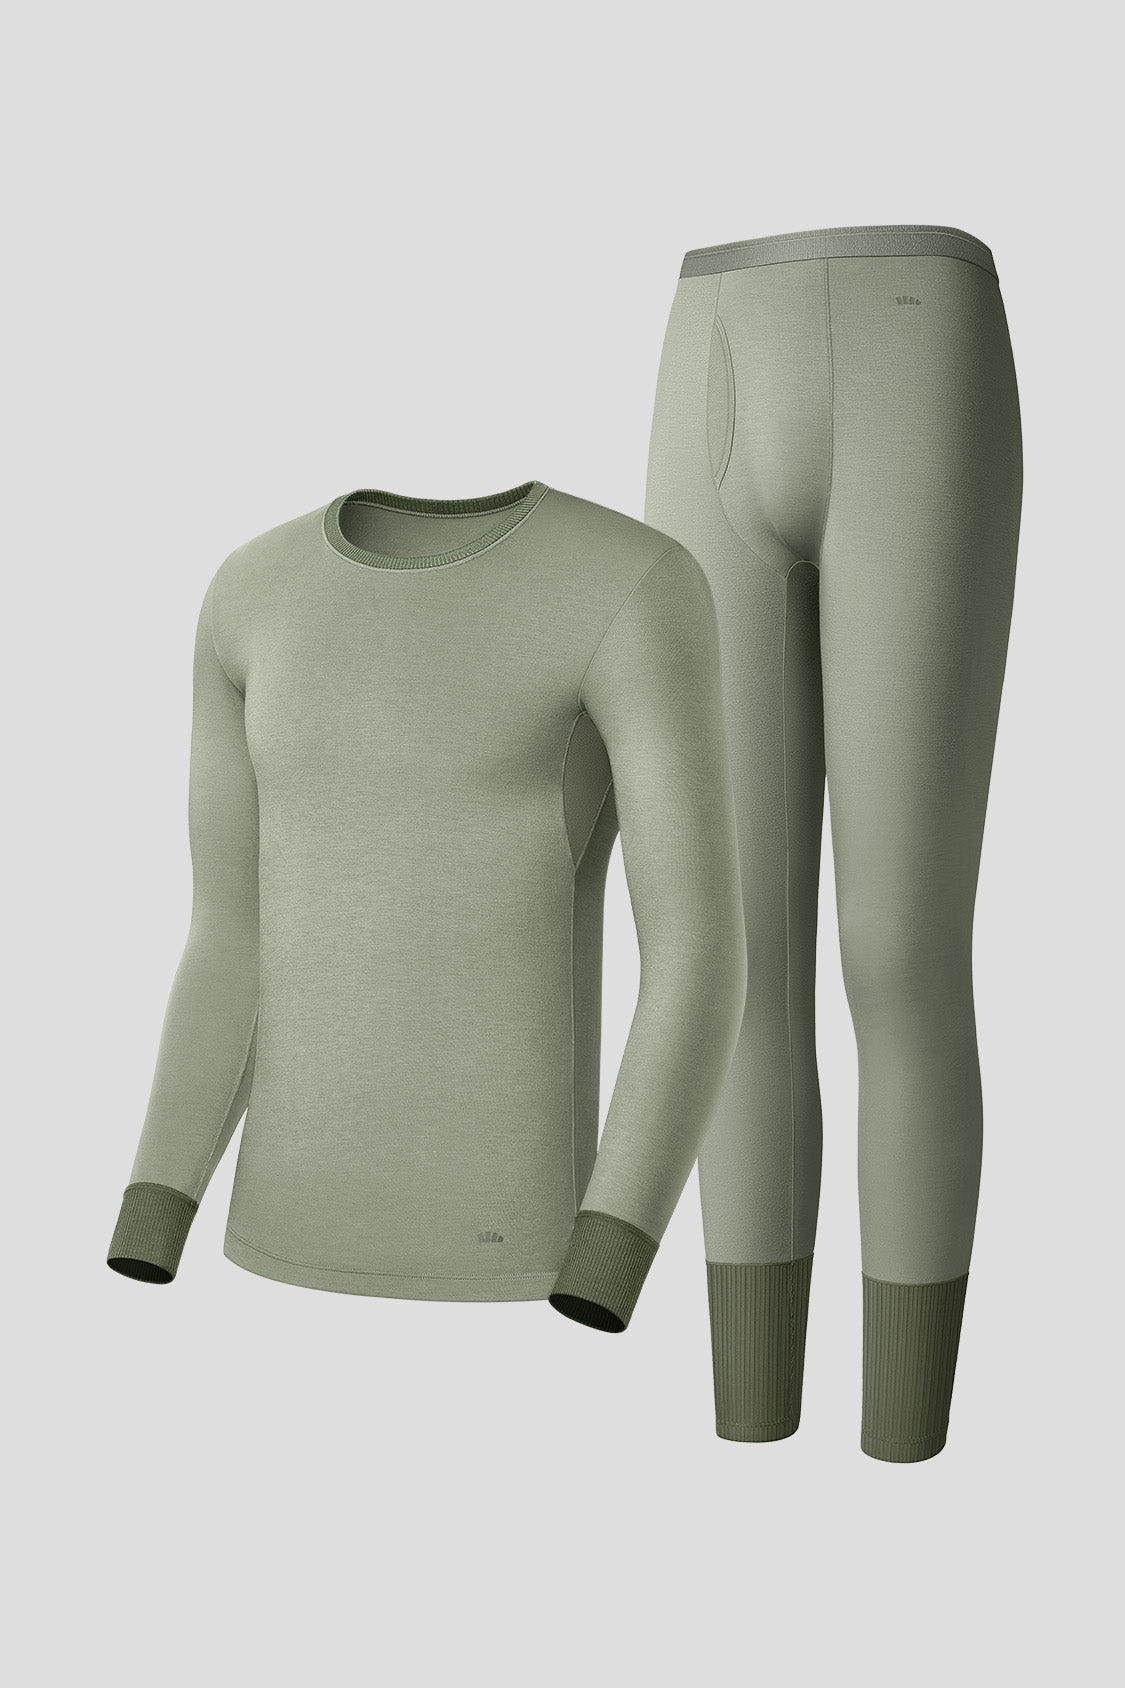 s Best-Selling Thermal Underwear Set Is on Sale for Under $30